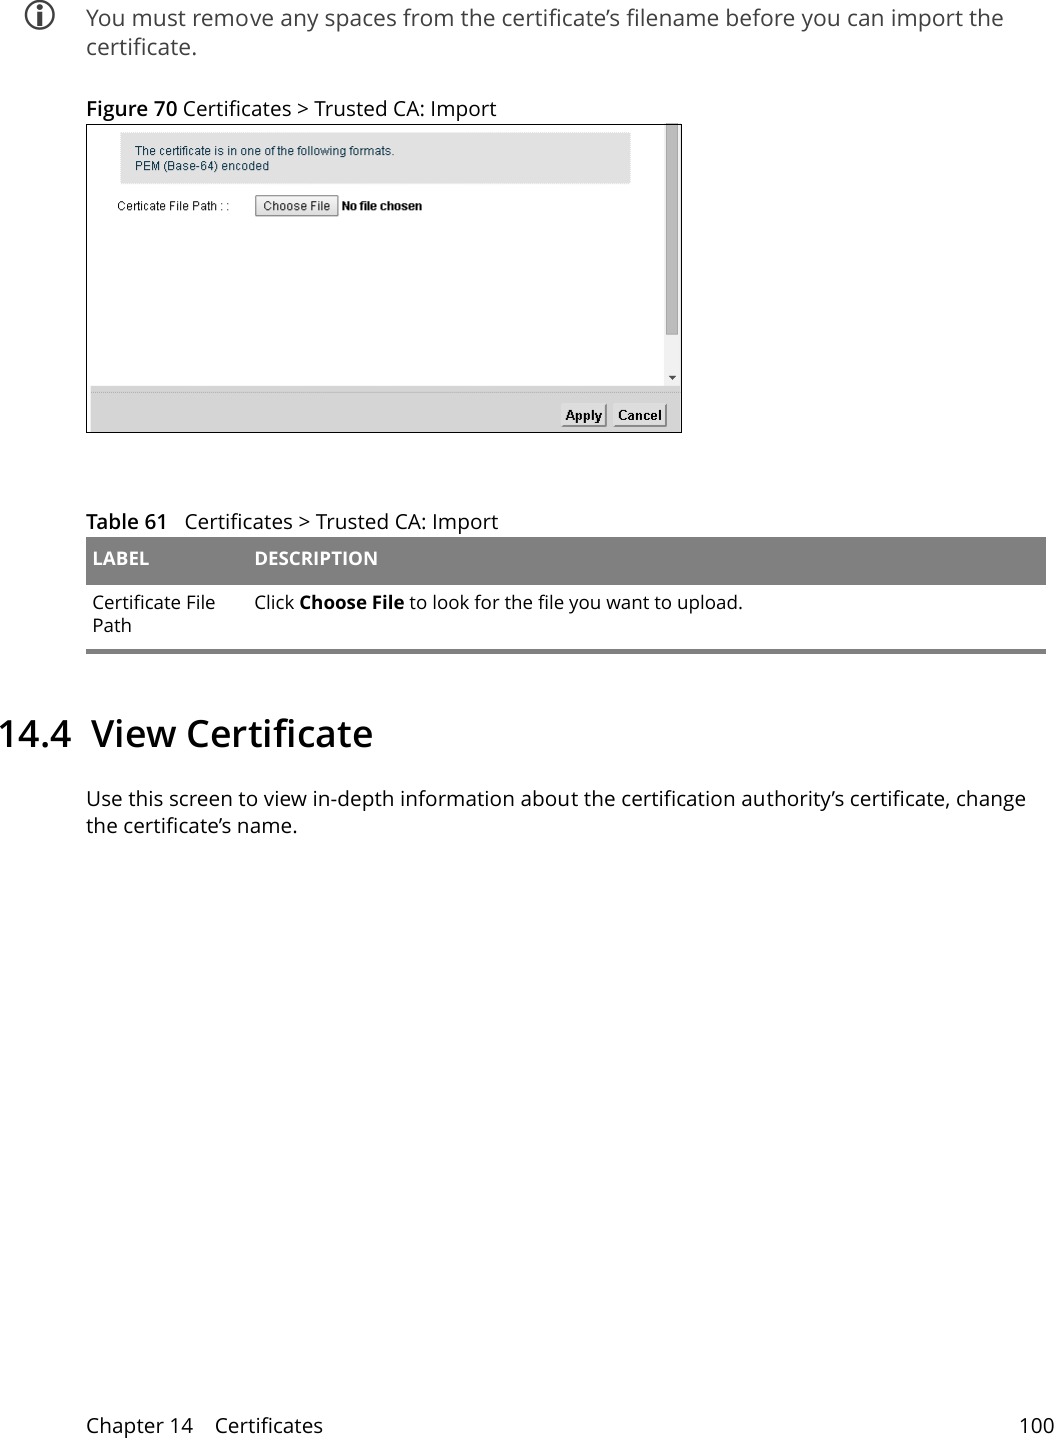 Chapter 14    Certificates 100 You must remove any spaces from the certificate’s filename before you can import the certificate.Figure 70 Certificates &gt; Trusted CA: ImportTable 61   Certificates &gt; Trusted CA: Import LABEL DESCRIPTIONCertificate File Path Click Choose File to look for the file you want to upload.14.4  View Certificate Use this screen to view in-depth information about the certification authority’s certificate, change the certificate’s name.